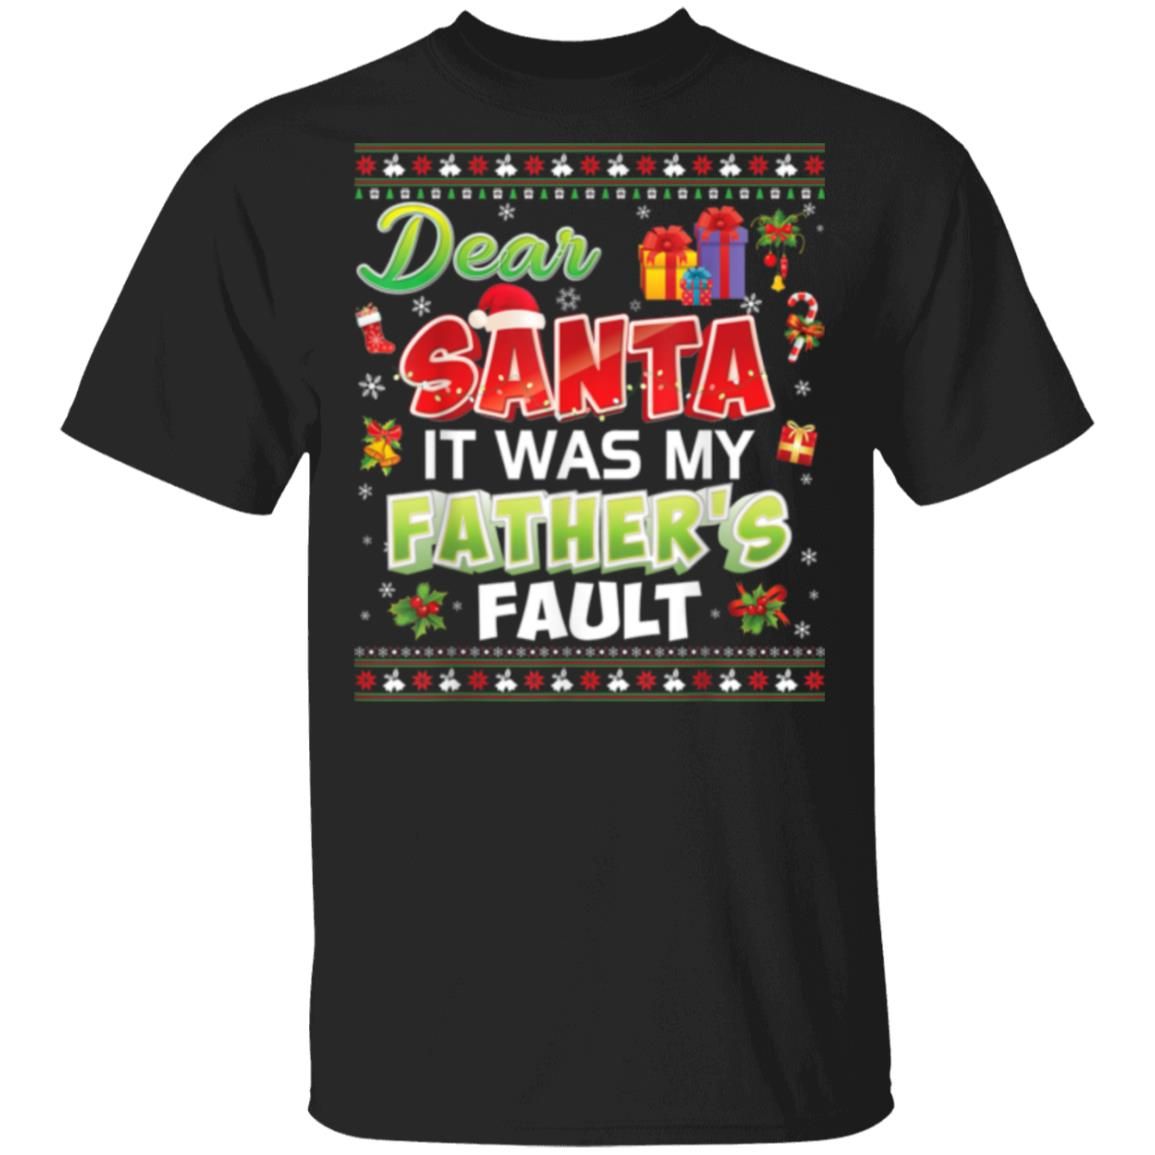 Dear Santa It Was My Father's Fault  Gift Christmas Christmas Shirt Style: Unisex T-shirt, Color: Black